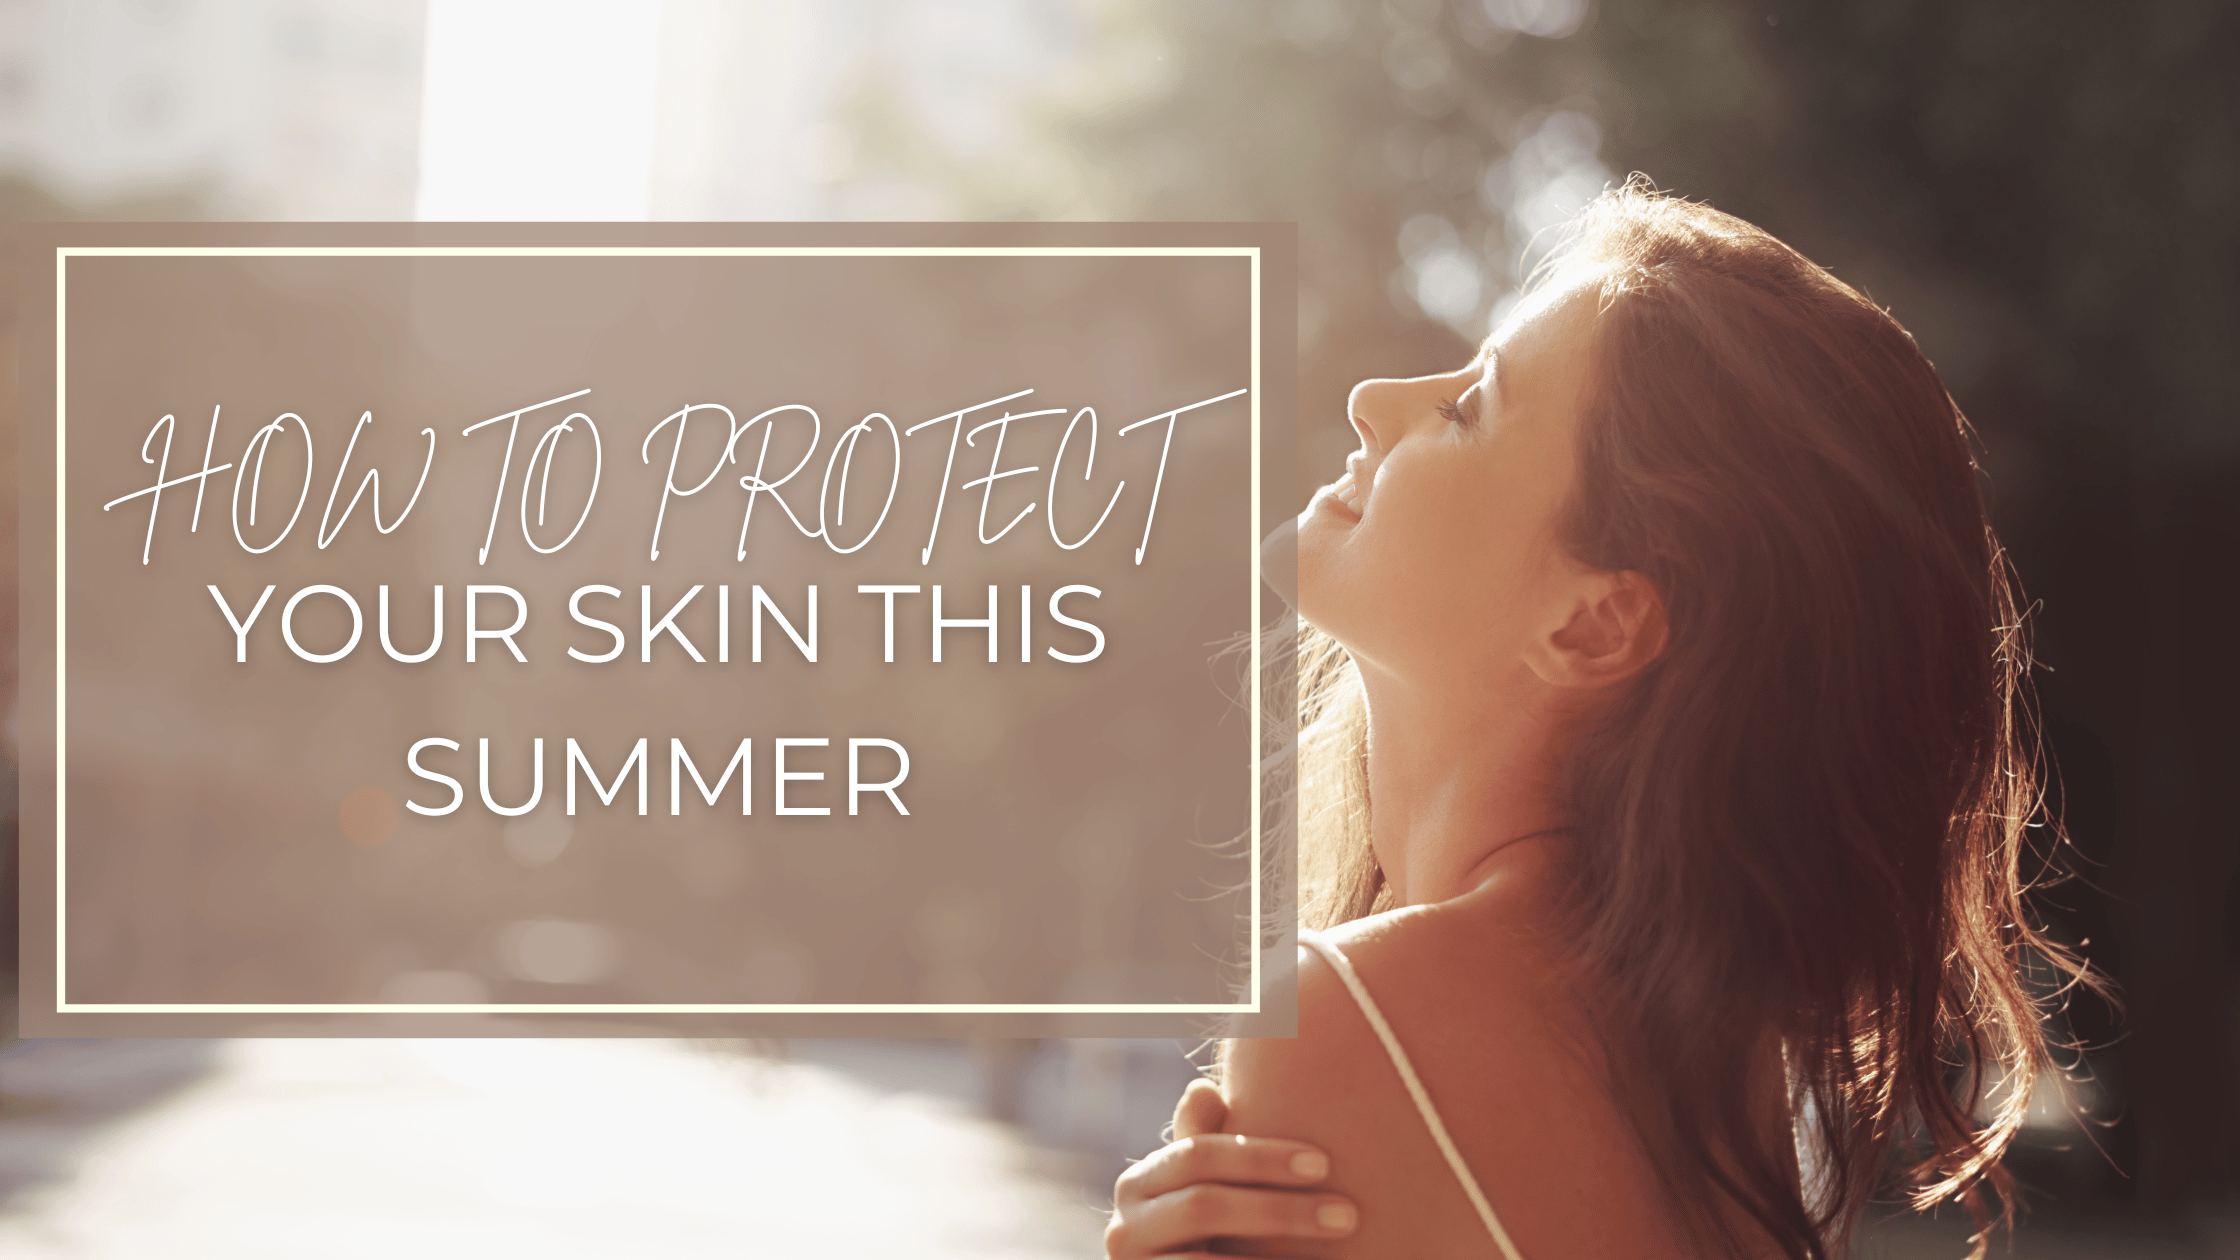 Beat the Heat: Skincare Strategies to Stay Radiant and Protected This Summer